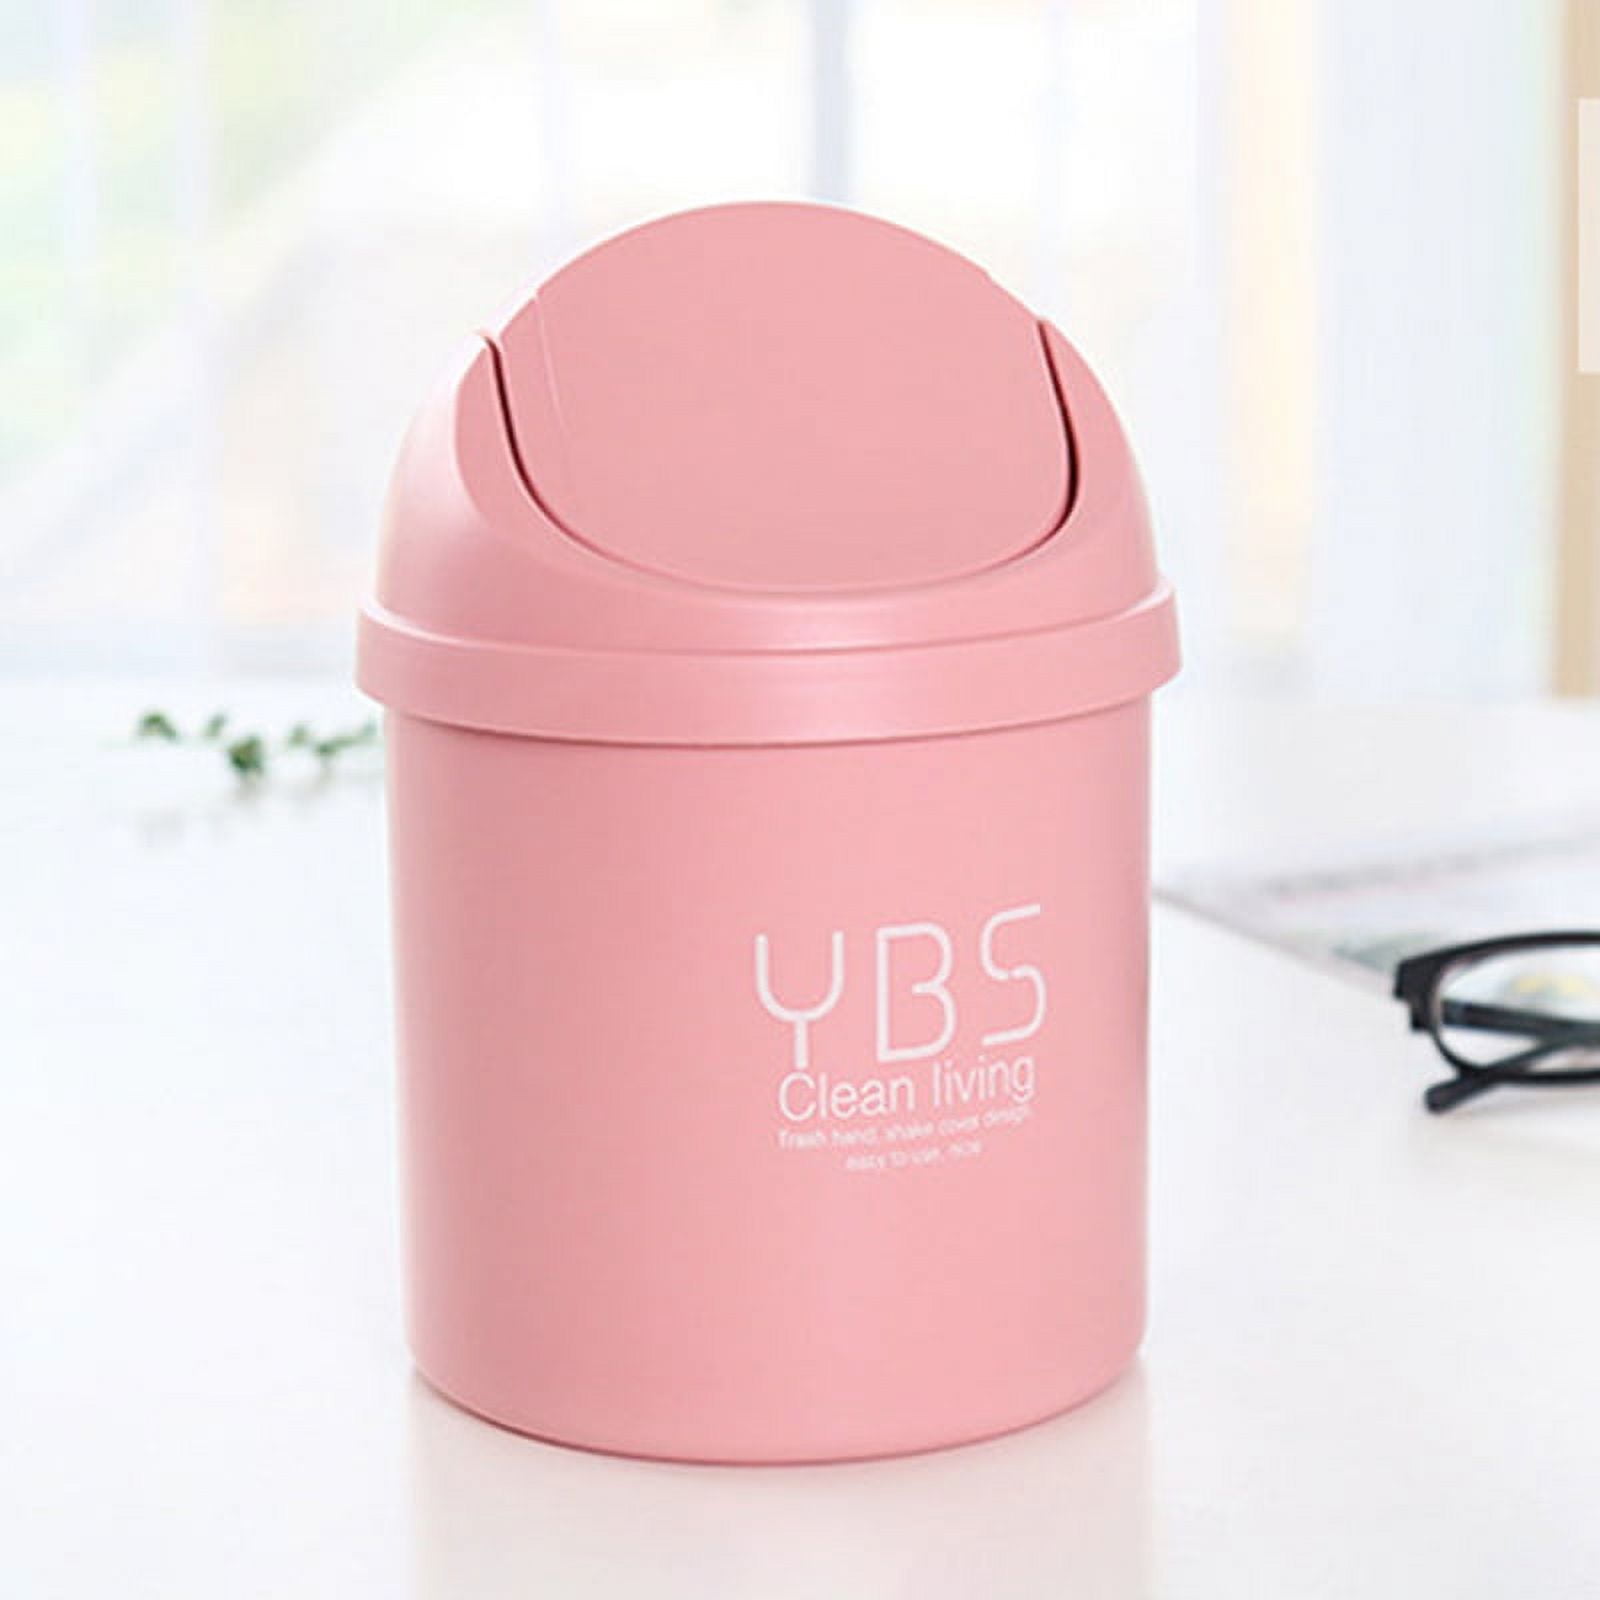 Mini Desktop Bin Small Trash Can Tube With Cover Bedroom Trash Garbage Can  Clean Workspace Kitchen Storage Box Home Desk Dustbin